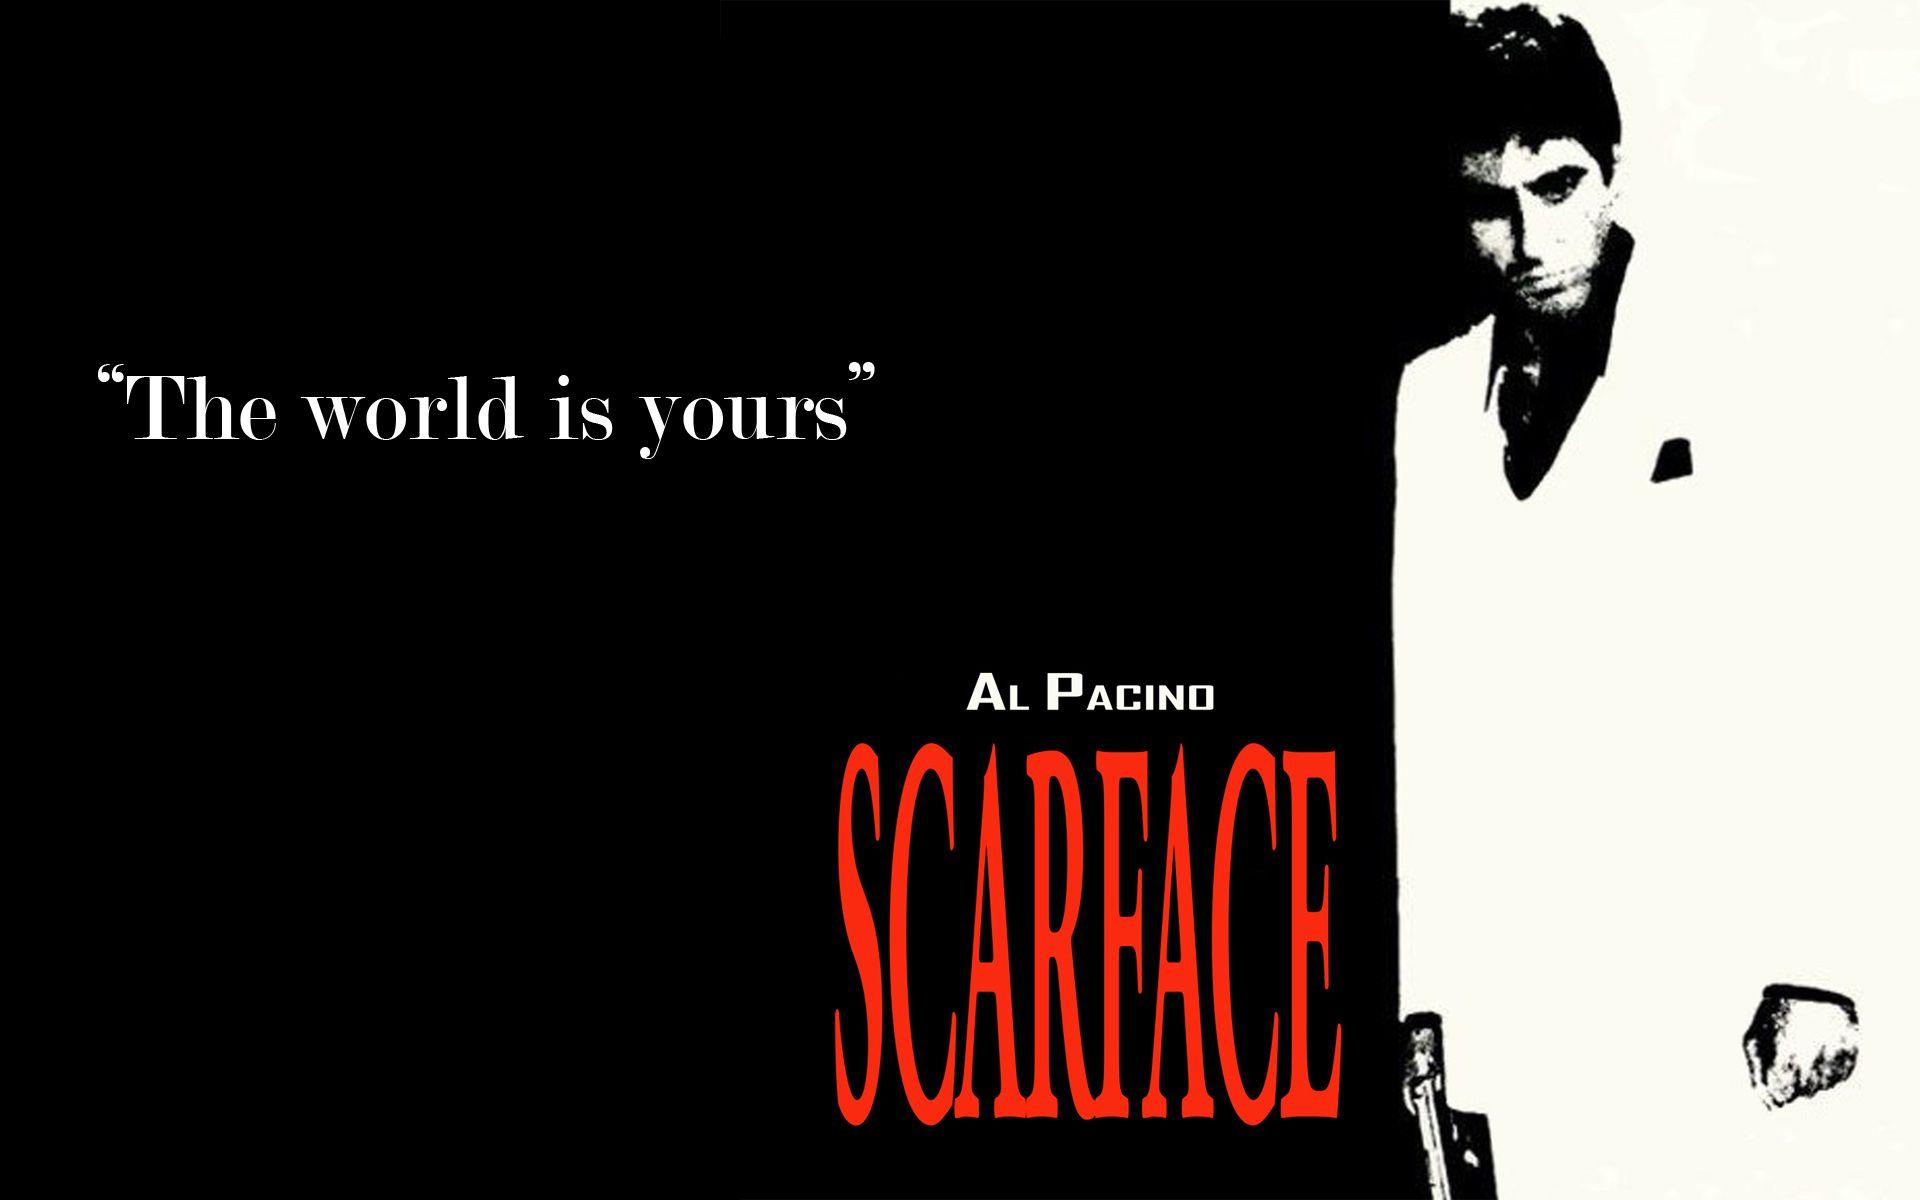 Scarface HD Wallpapers - Wallpaper Cave